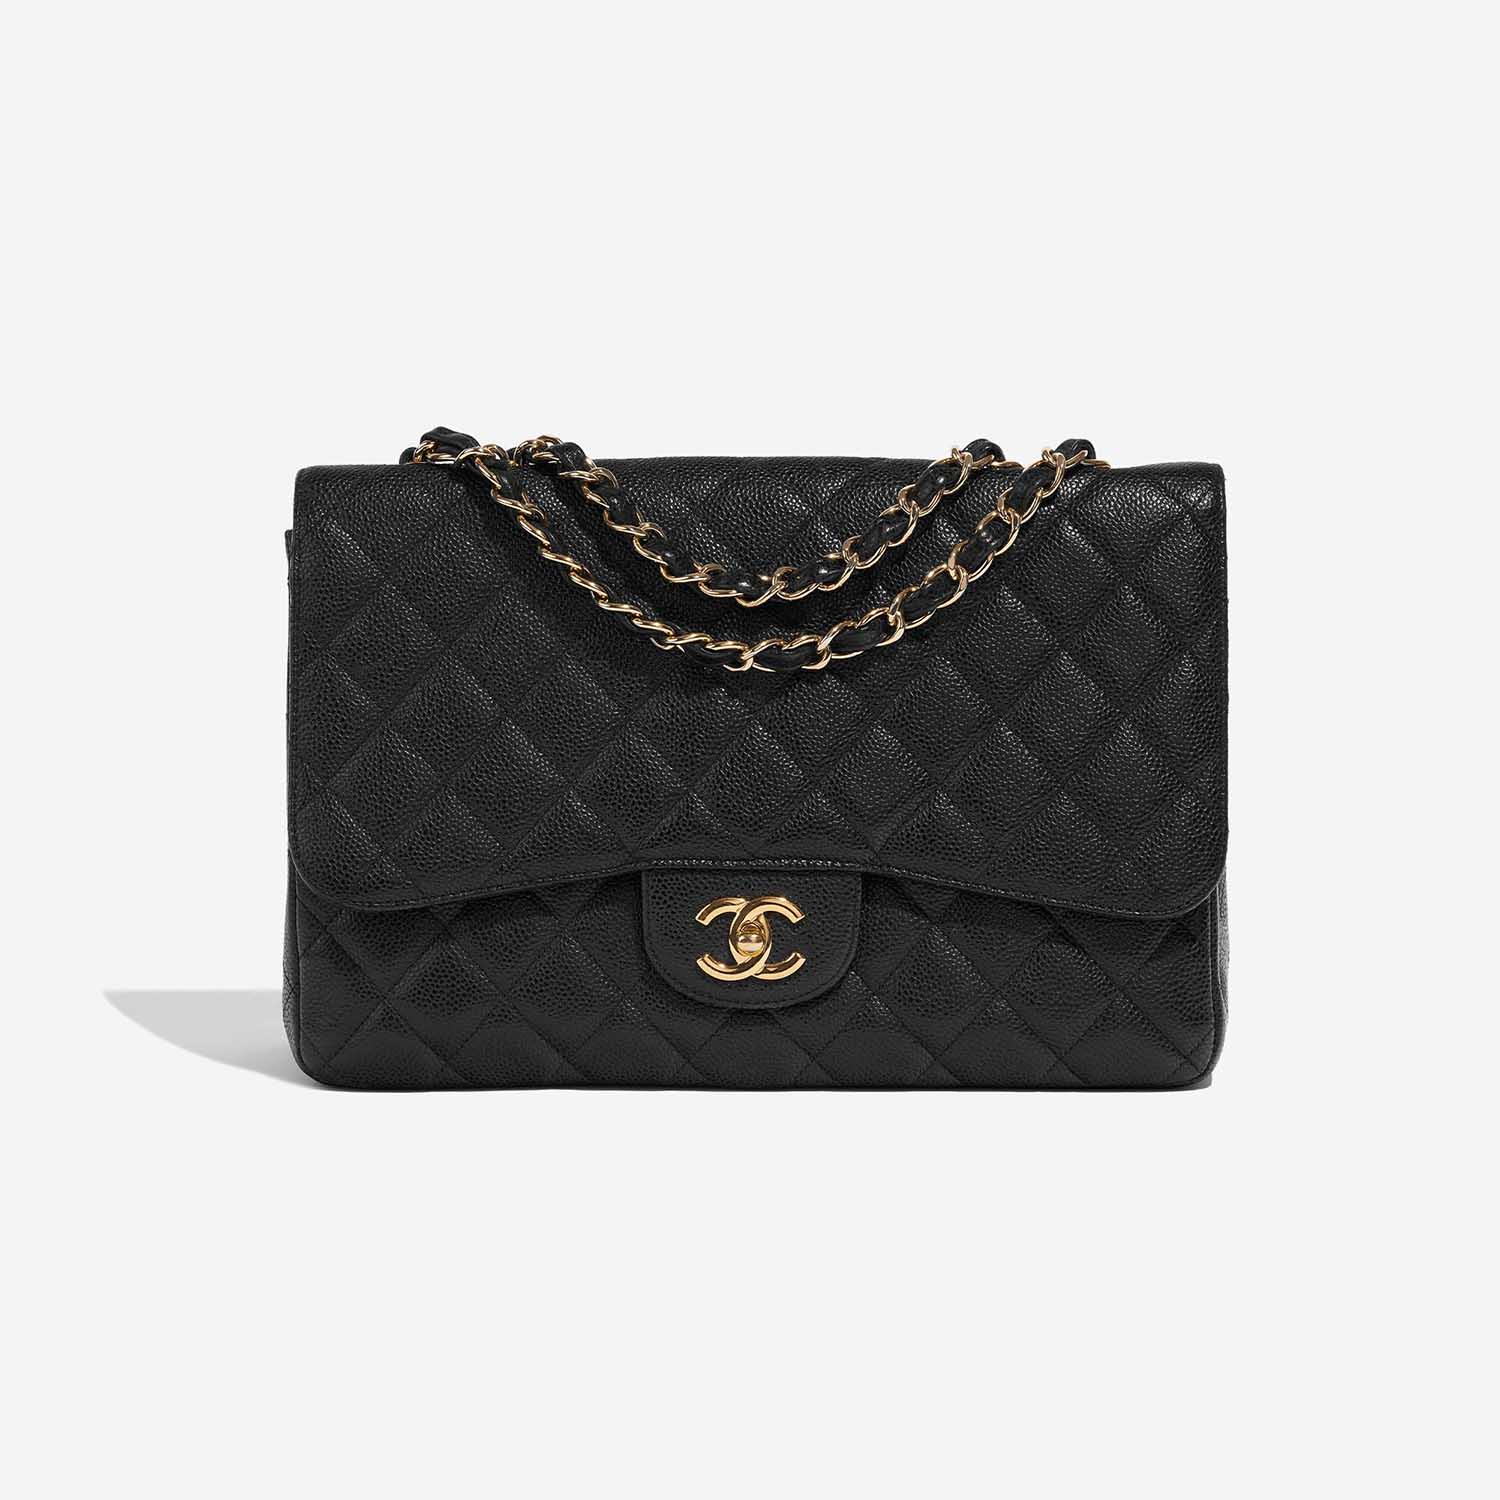 Chanel Black Quilted Lambskin Leather Classic Jumbo Single Flap